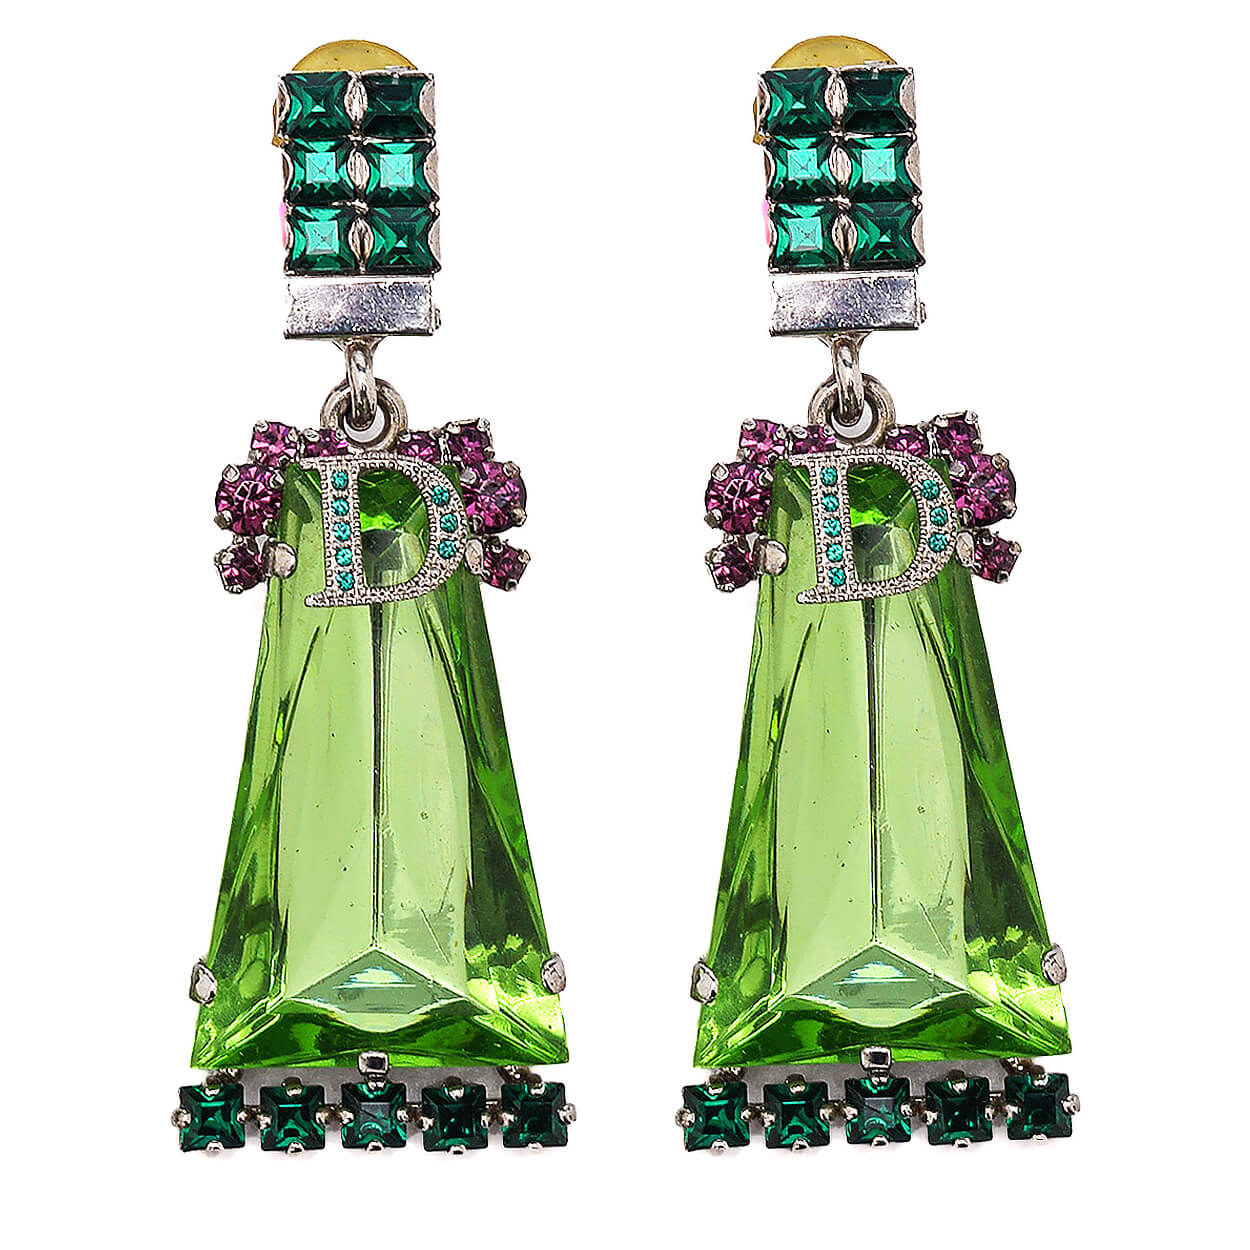 Christian Dior - Christian Dior by John Galliano Couture Runway Earrings With Green Crystals